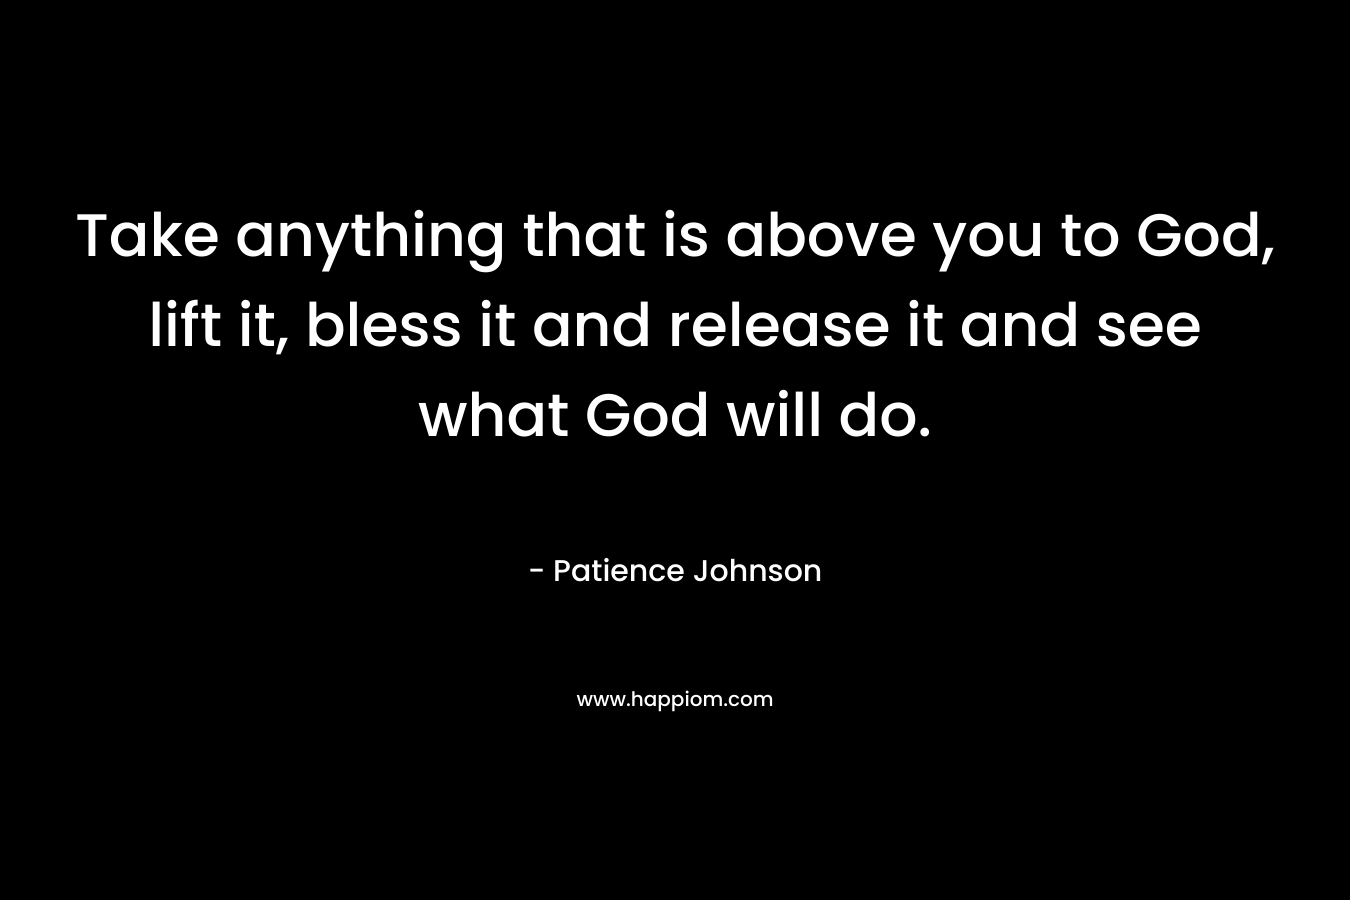 Take anything that is above you to God, lift it, bless it and release it and see what God will do.